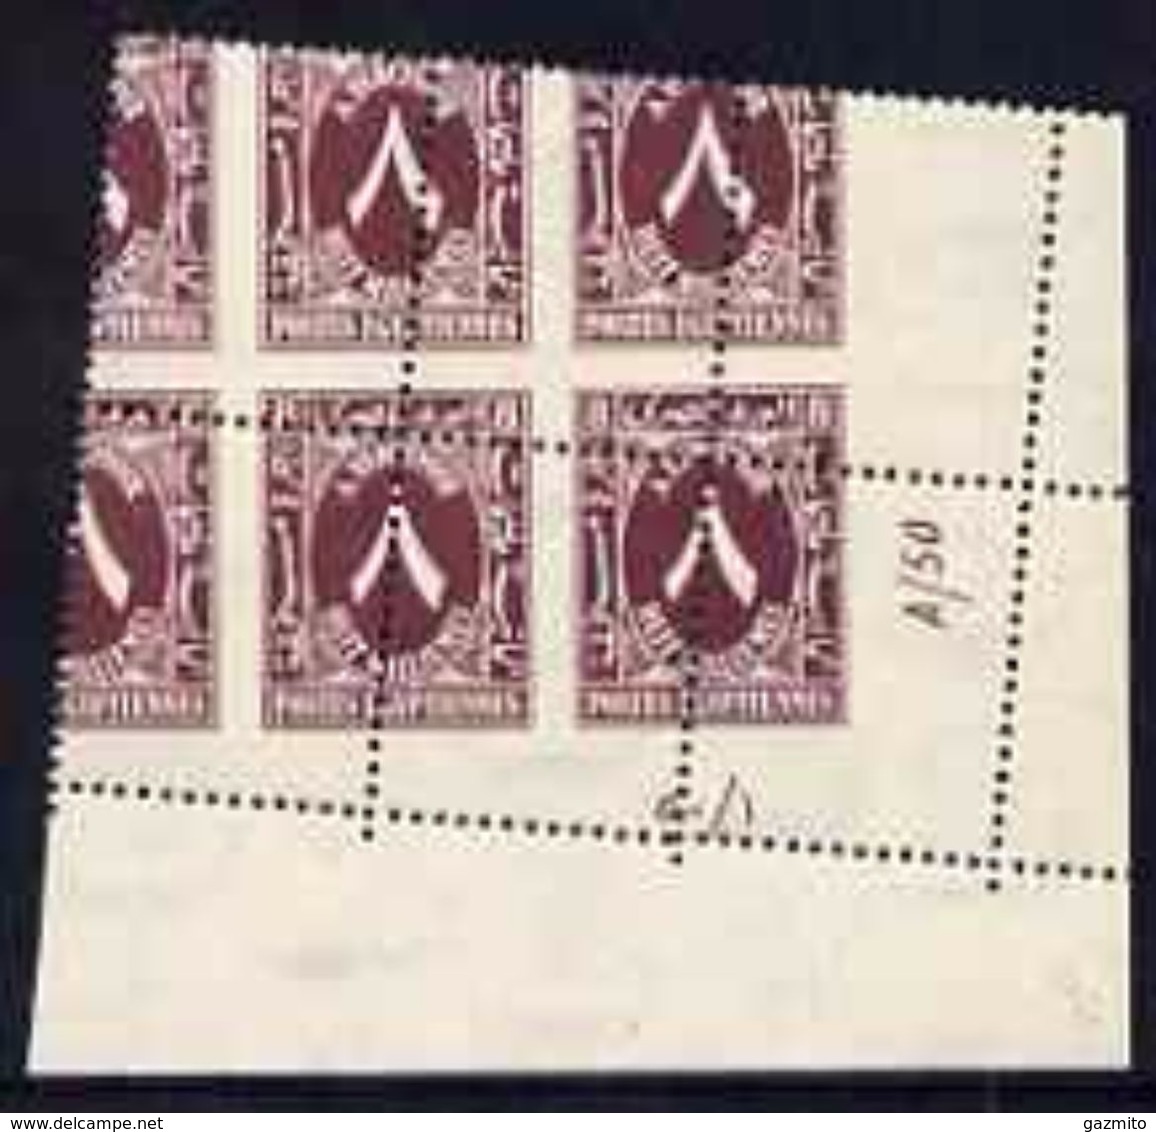 Egypt 1927-56, Postage Due 8m Purple Unmounted Mint Corner Plate Block Of 6 (plate A50) - Unused Stamps